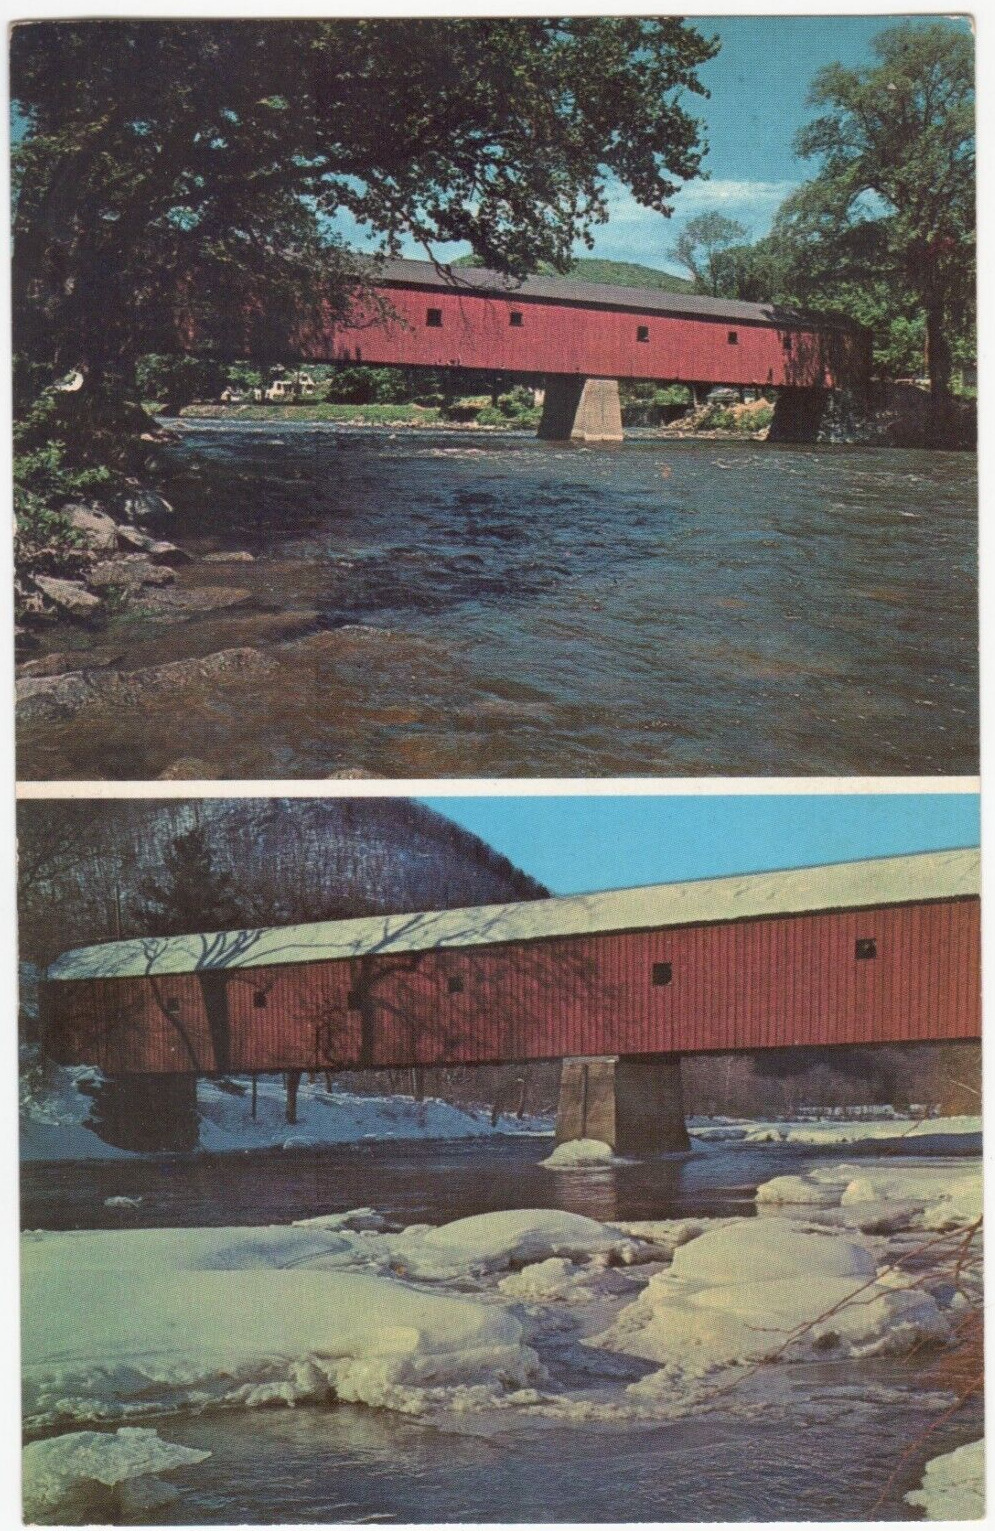 Dual View Covered Bridge Housatonic River West Cornwall CT by Scofield Postcard